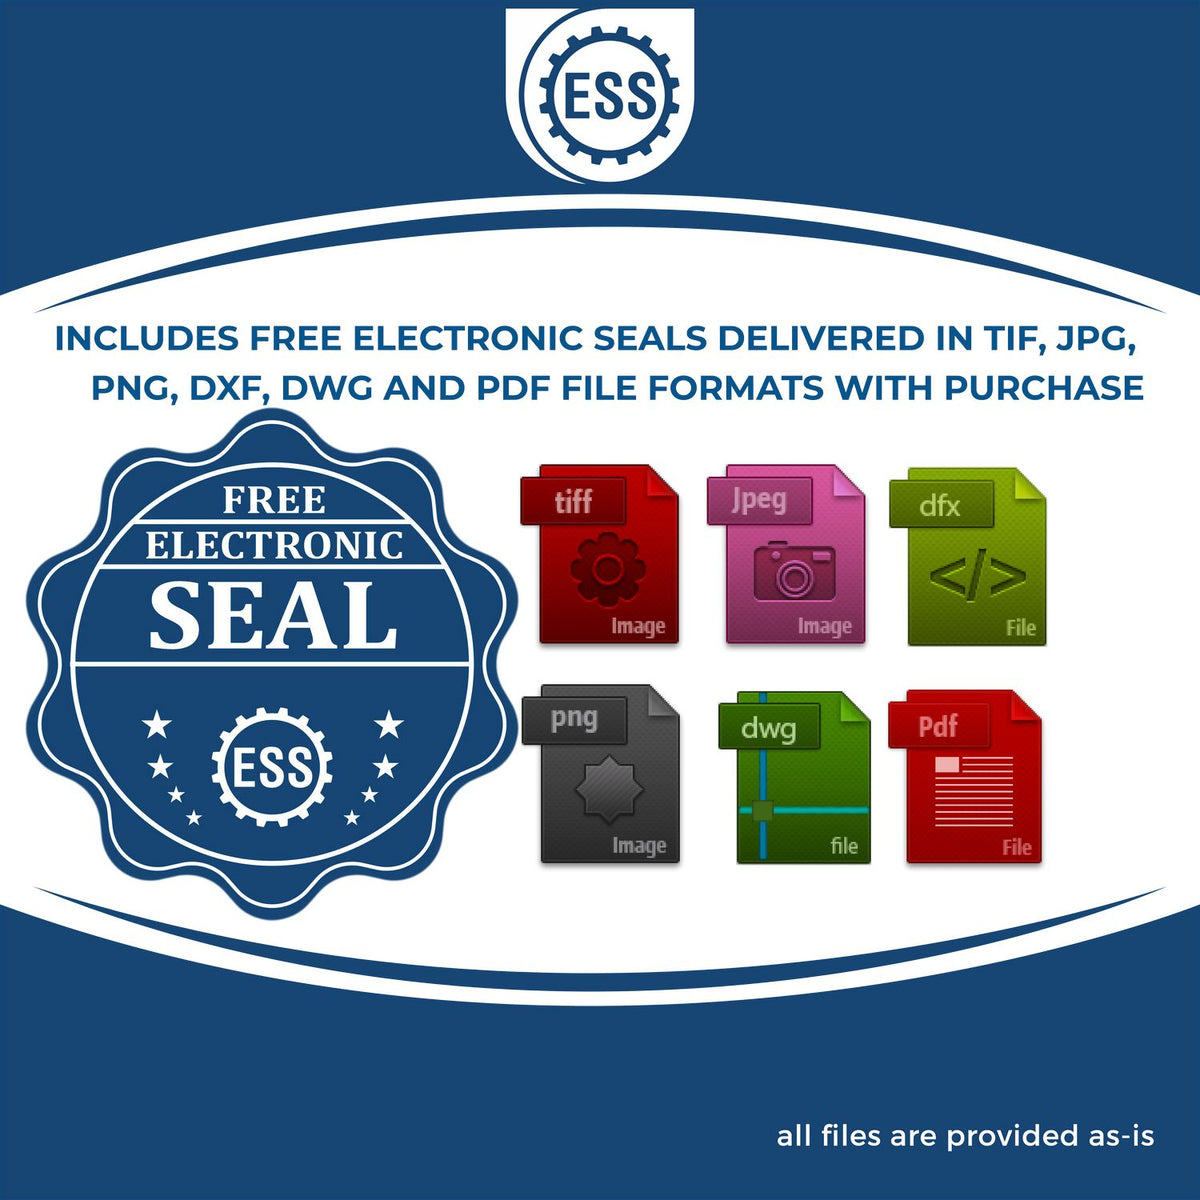 An infographic for the free electronic seal for the Heavy-Duty Maine Rectangular Notary Stamp illustrating the different file type icons such as DXF, DWG, TIF, JPG and PNG.